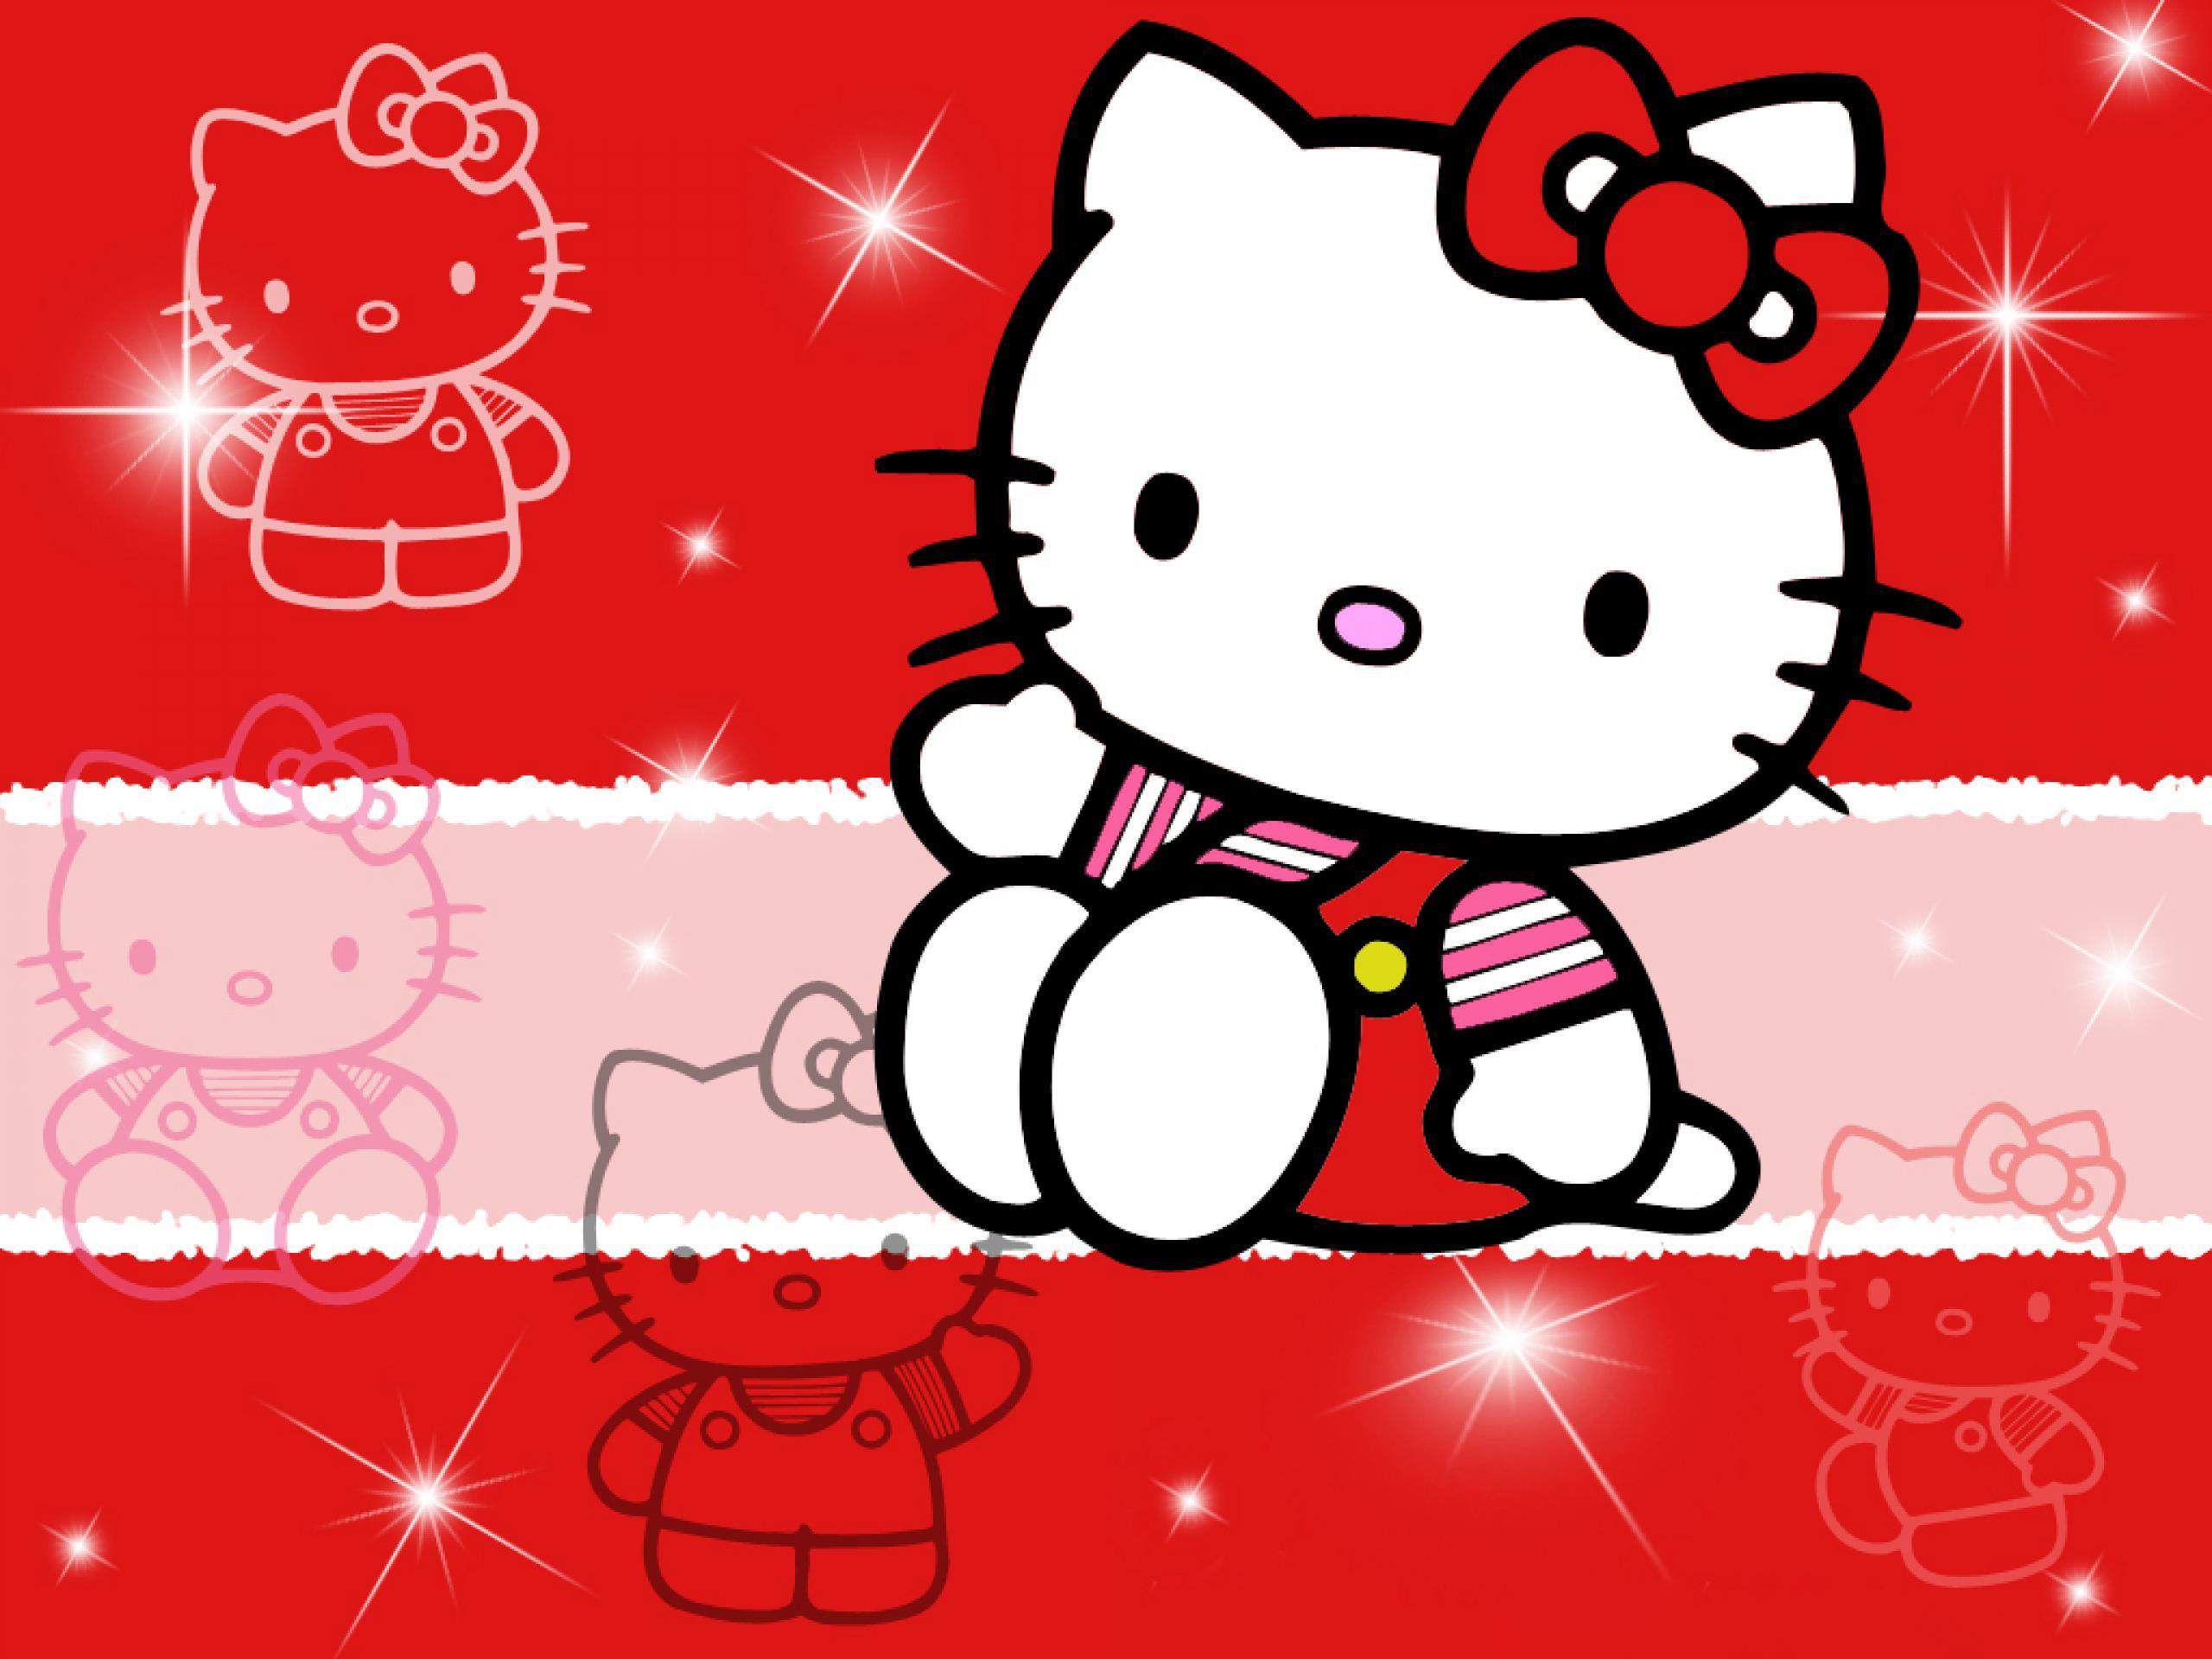 Hello Kitty: Was created in 1974, The first item, a vinyl coin purse, was introduced in 1975. 2560x1920 HD Background.